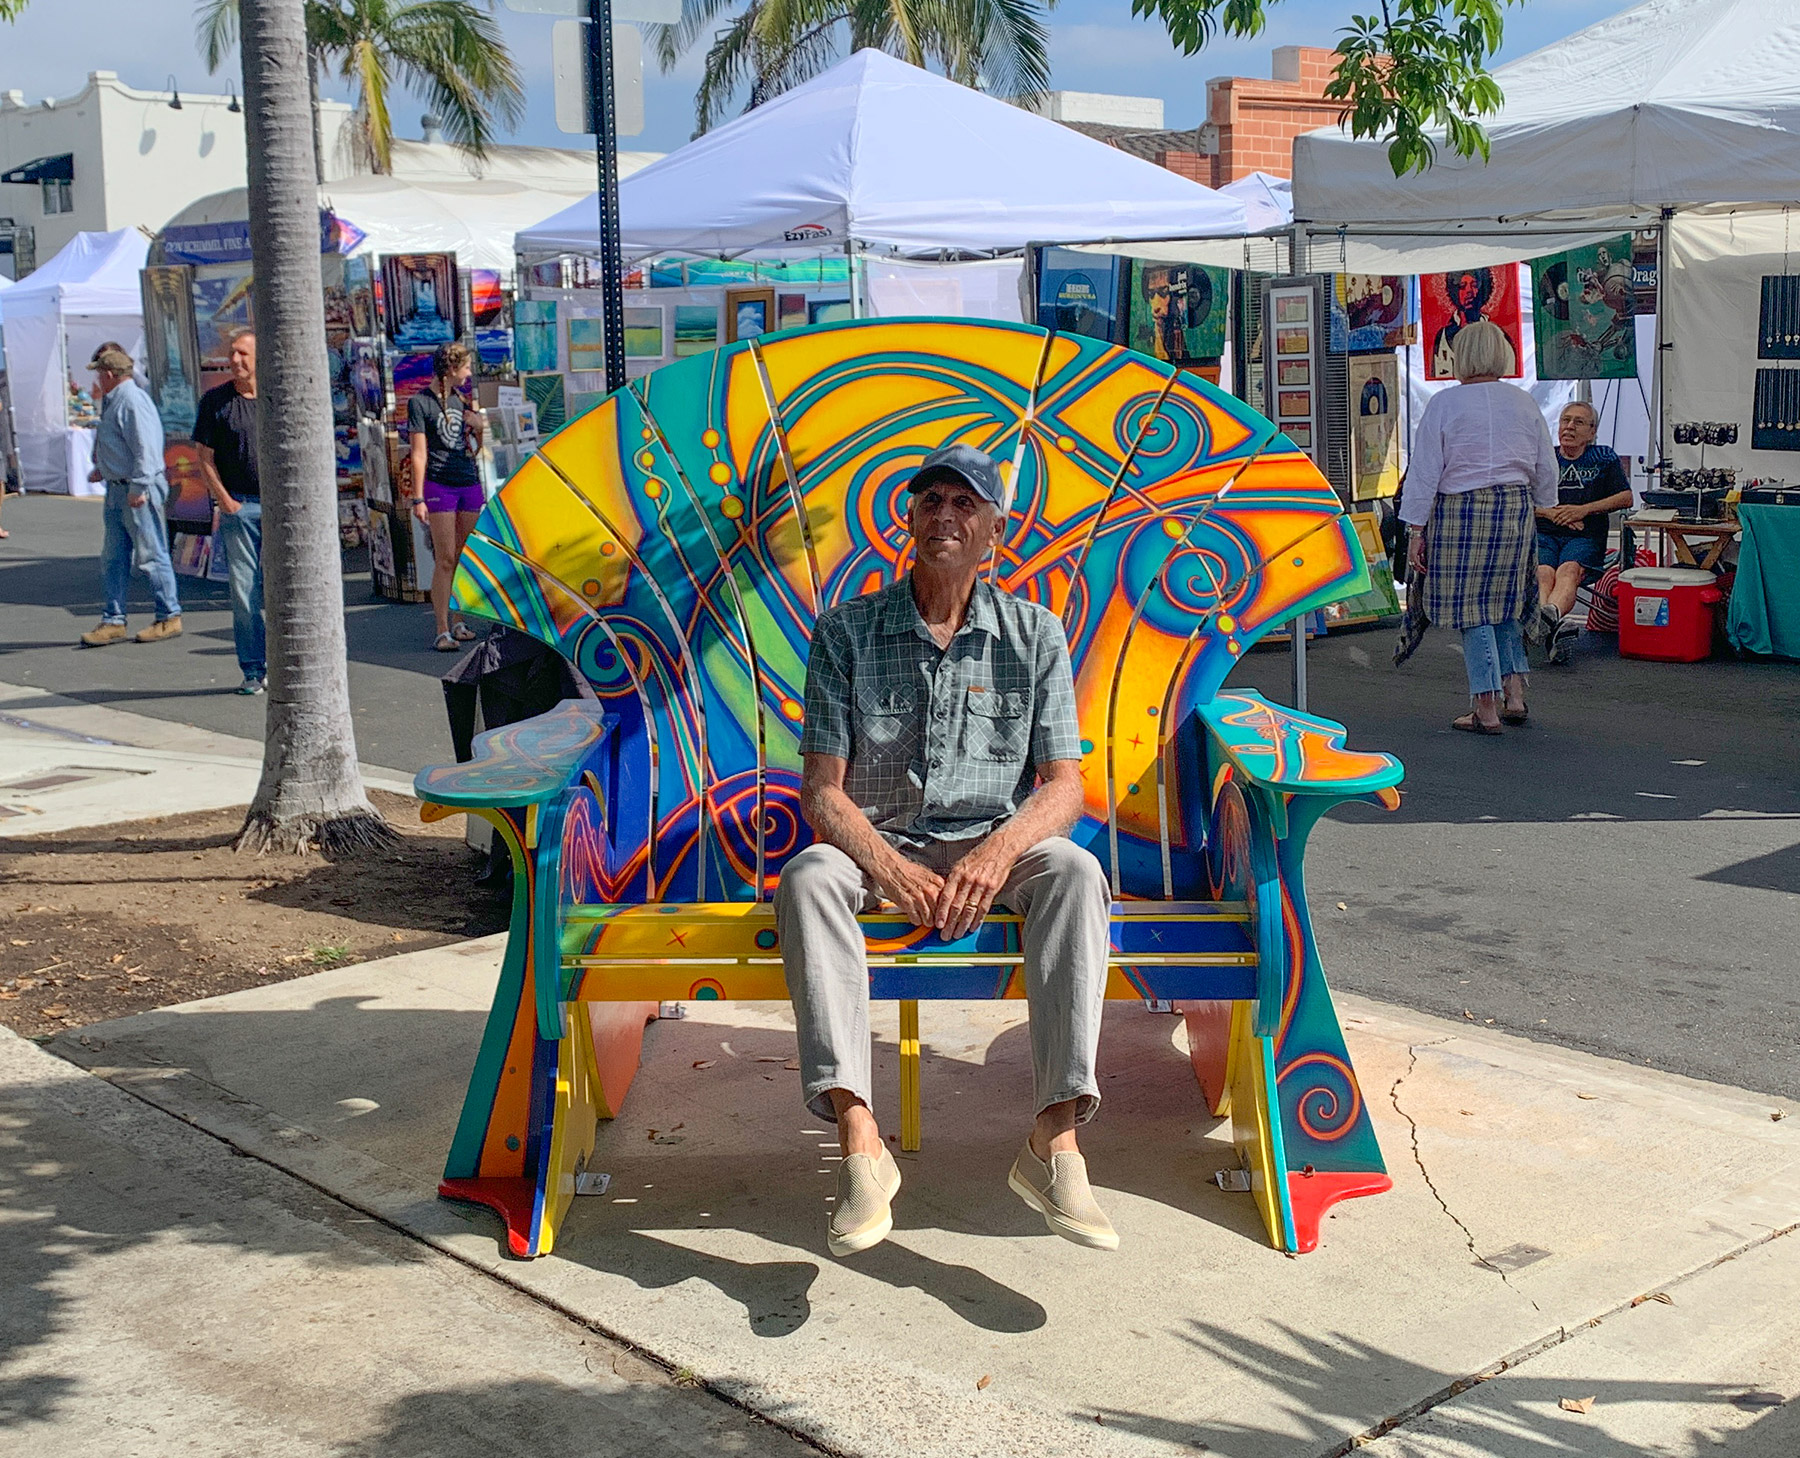 New Public Art organized by the City of Carlsbad Cultural Arts